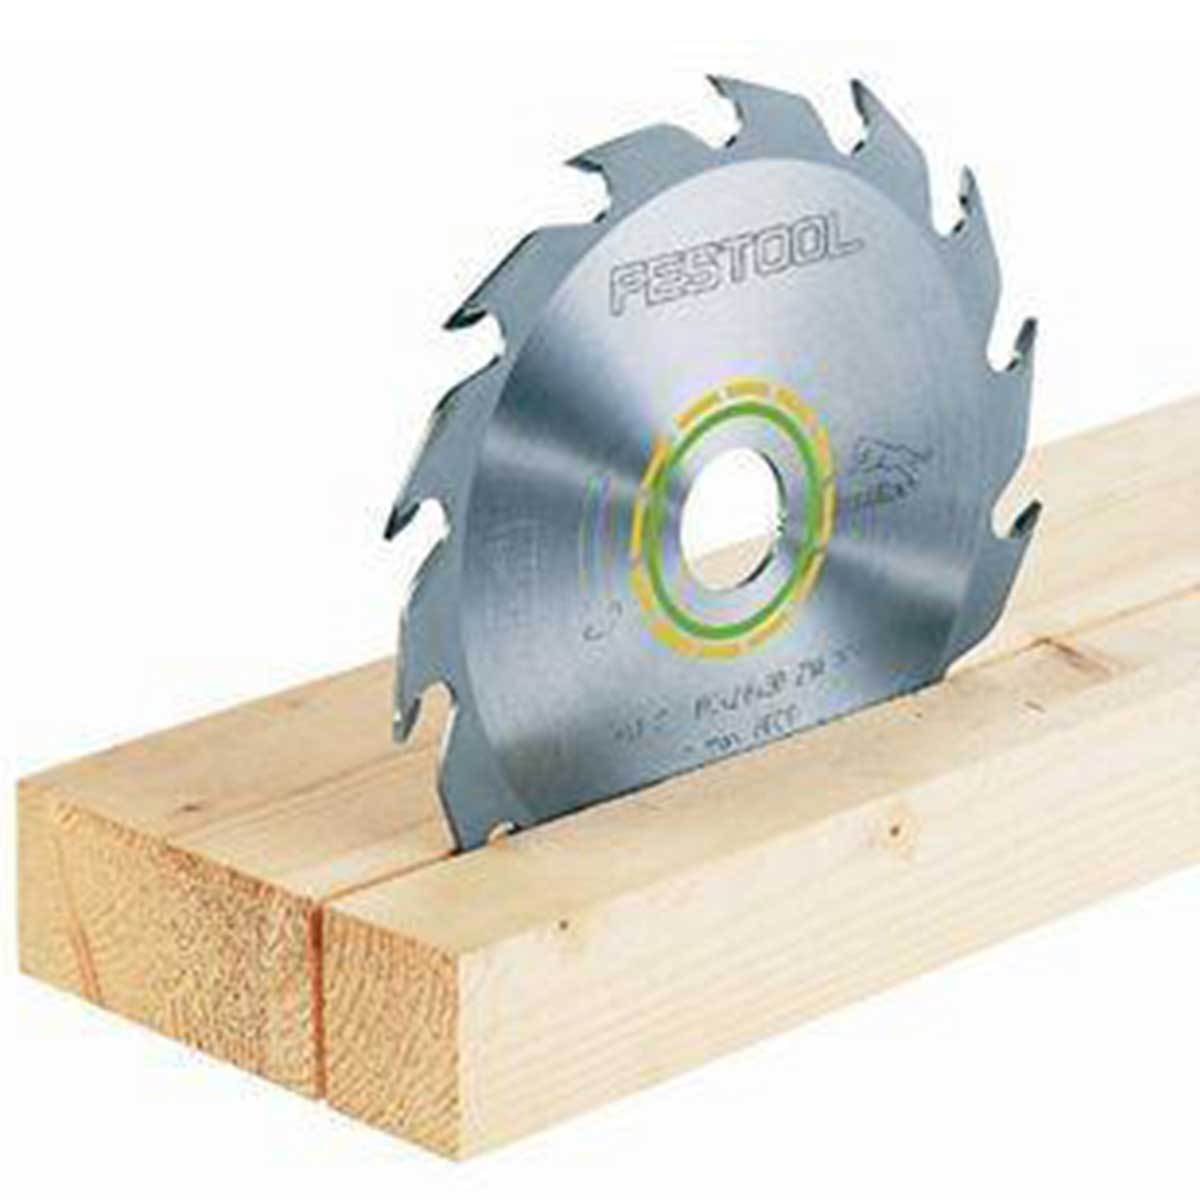 Ultimate Tools Festool TS 55 Track Saw Blades - For Any Material